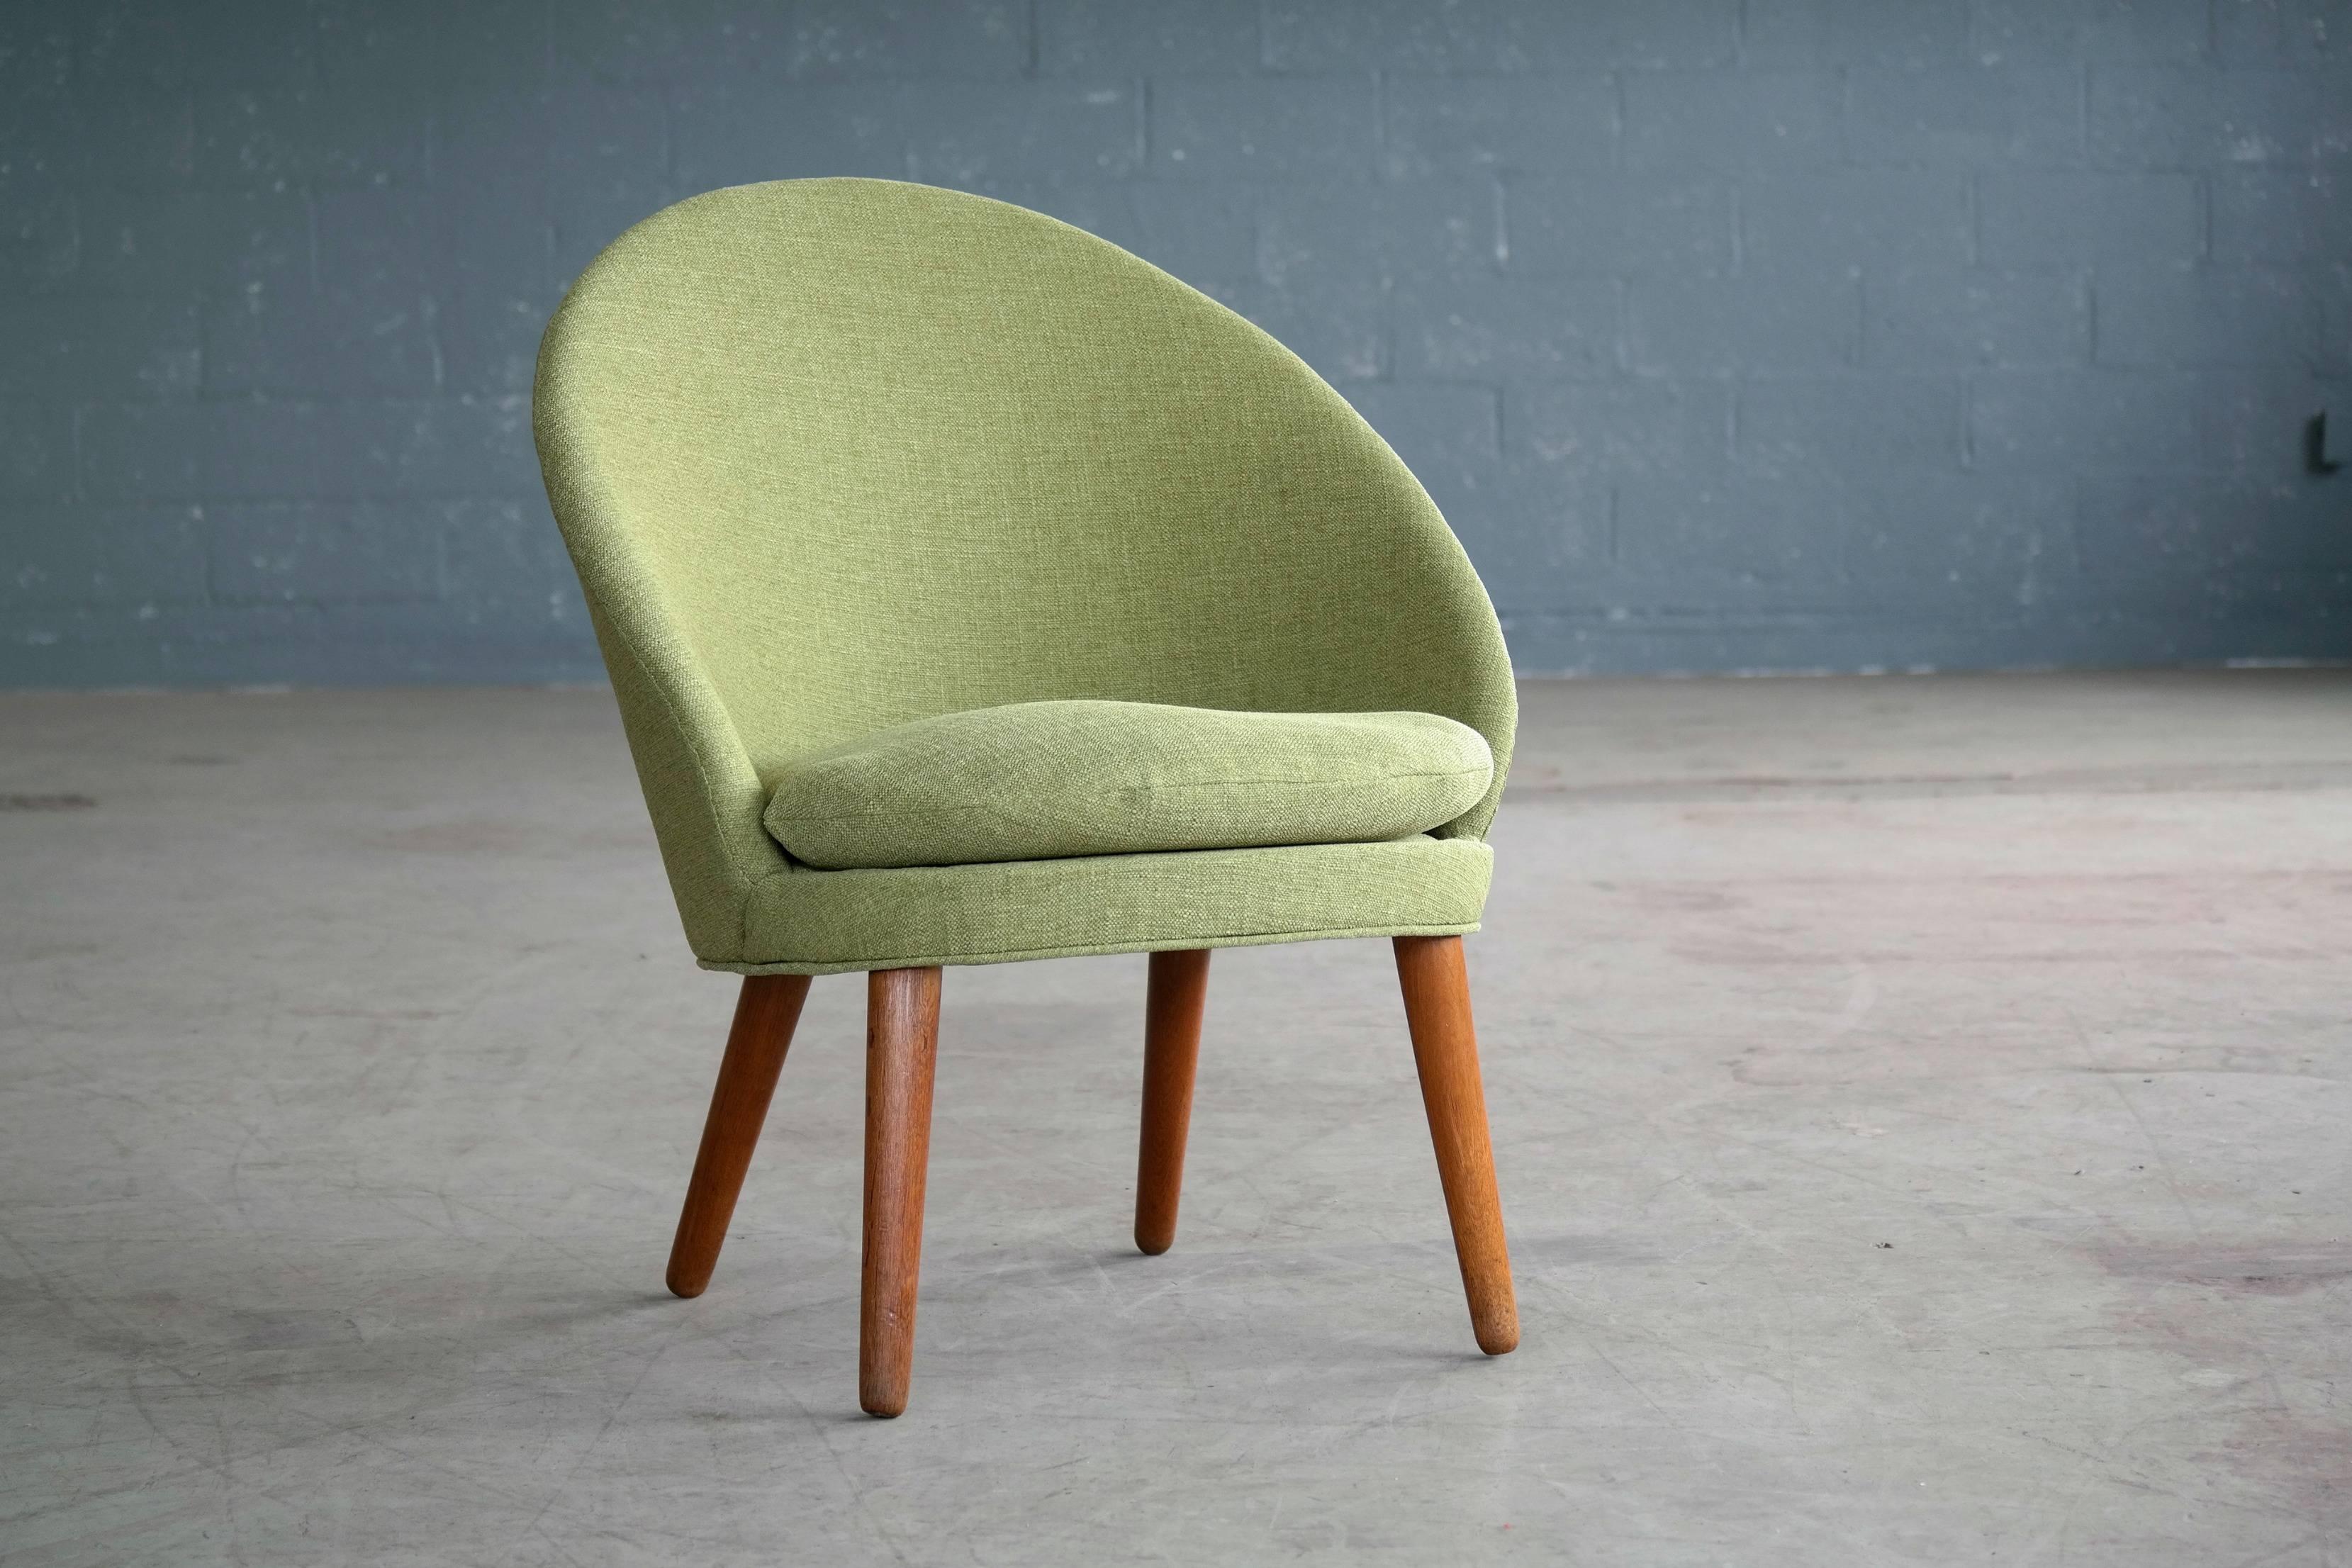 Classic easy chair with curved back and legs in solid oak designed by Ejvind A. Johansson in 1958 as Model 301 for Gotfred H. Petersen. Newly refurbished and re-upholstered in a green linen fabric.
A pair is available if interested.
